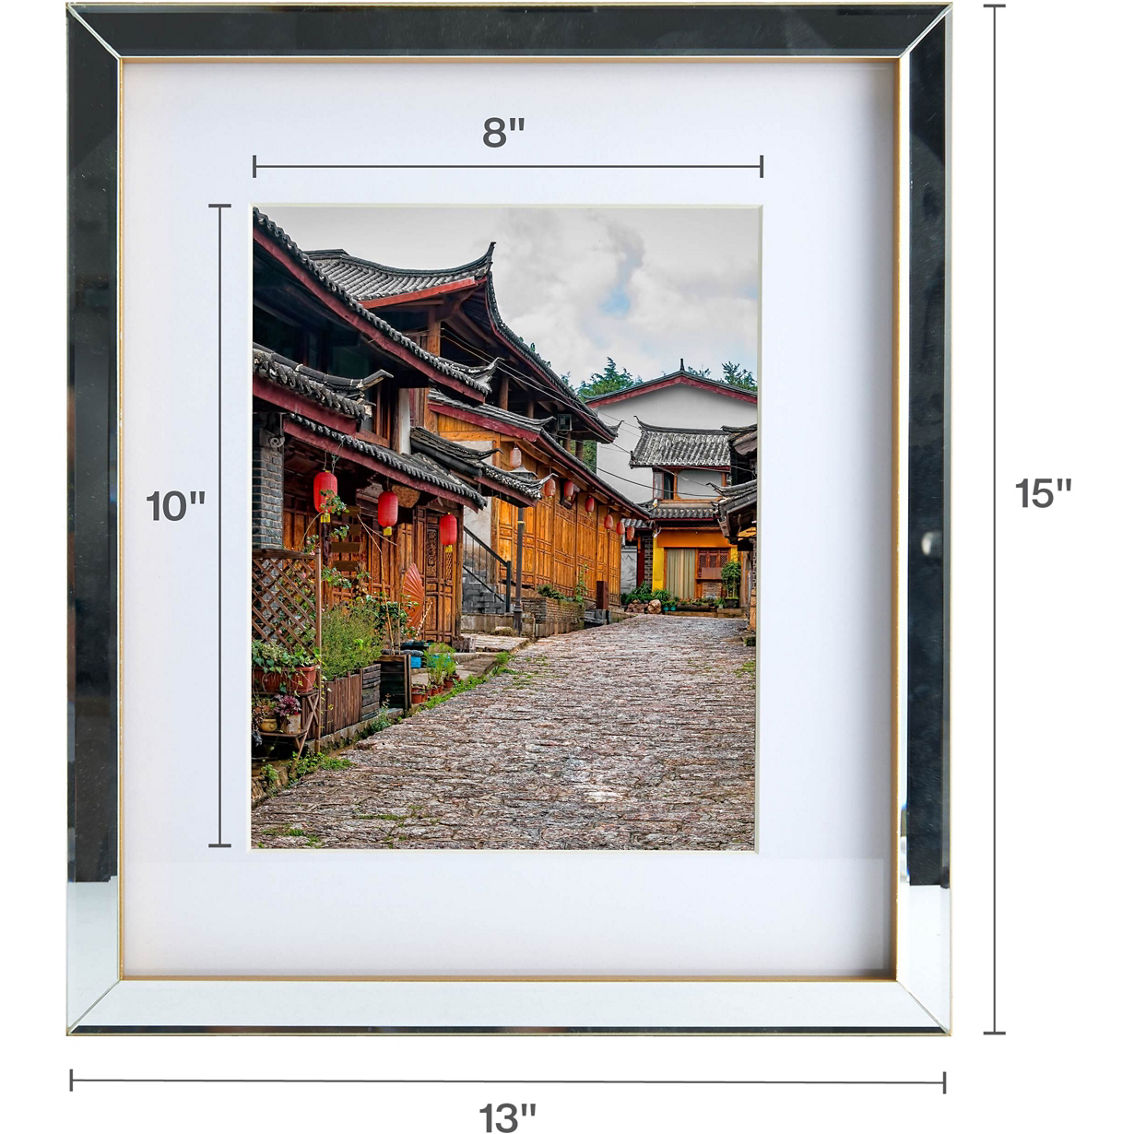 Mikasa Home 8 in. x 10 in. and 11 in. x 14 in. Mirror Gallery Frame with Gold Sides - Image 2 of 6